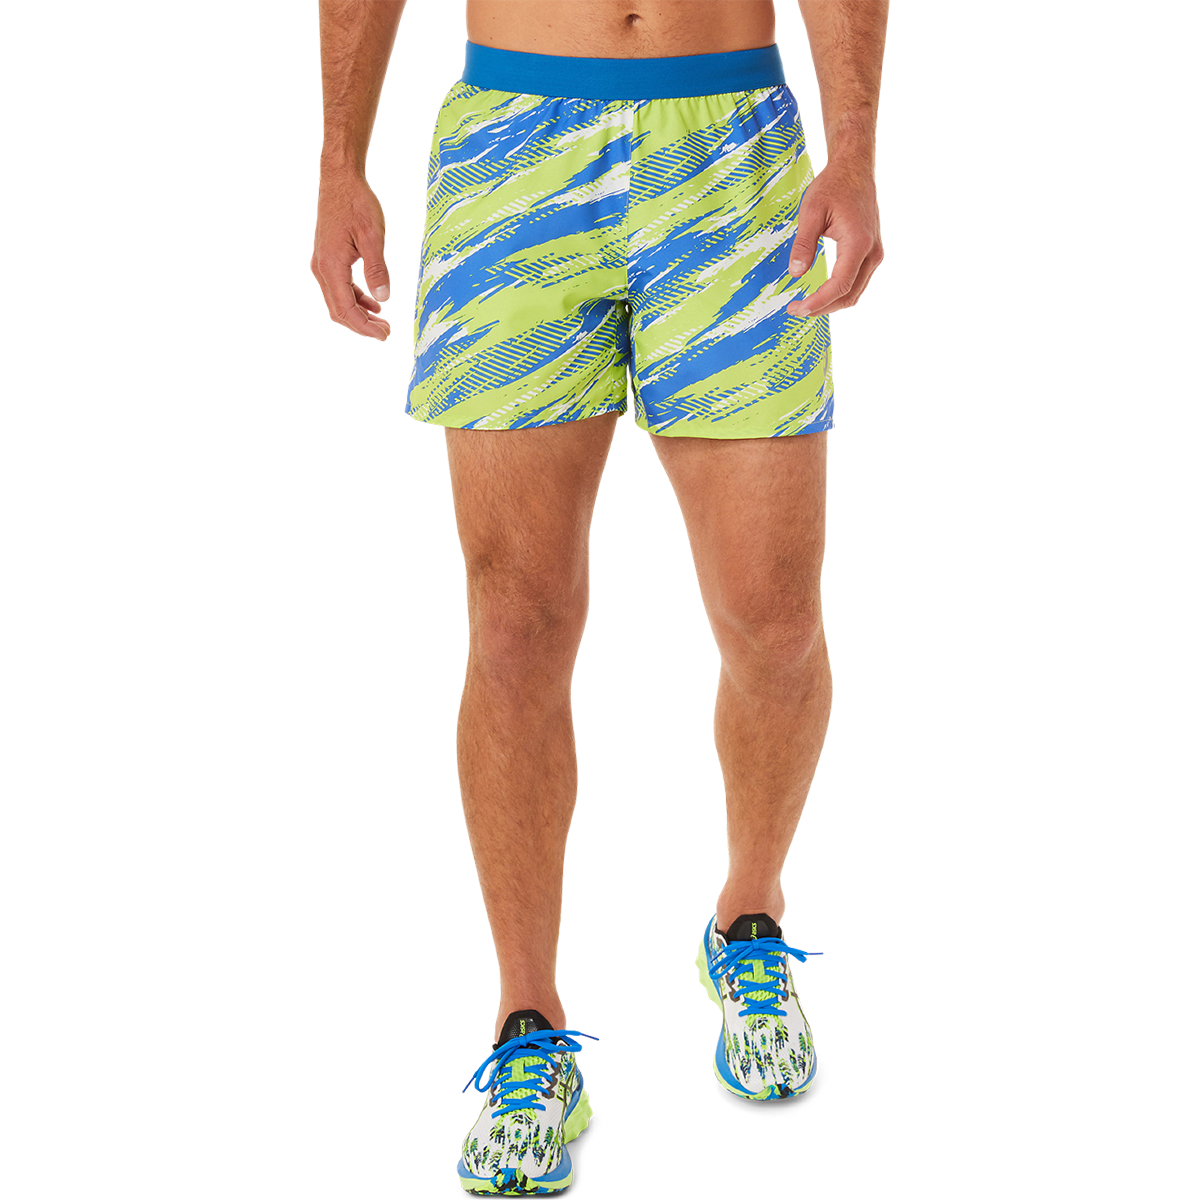 Asics Color Injection Short, , large image number null